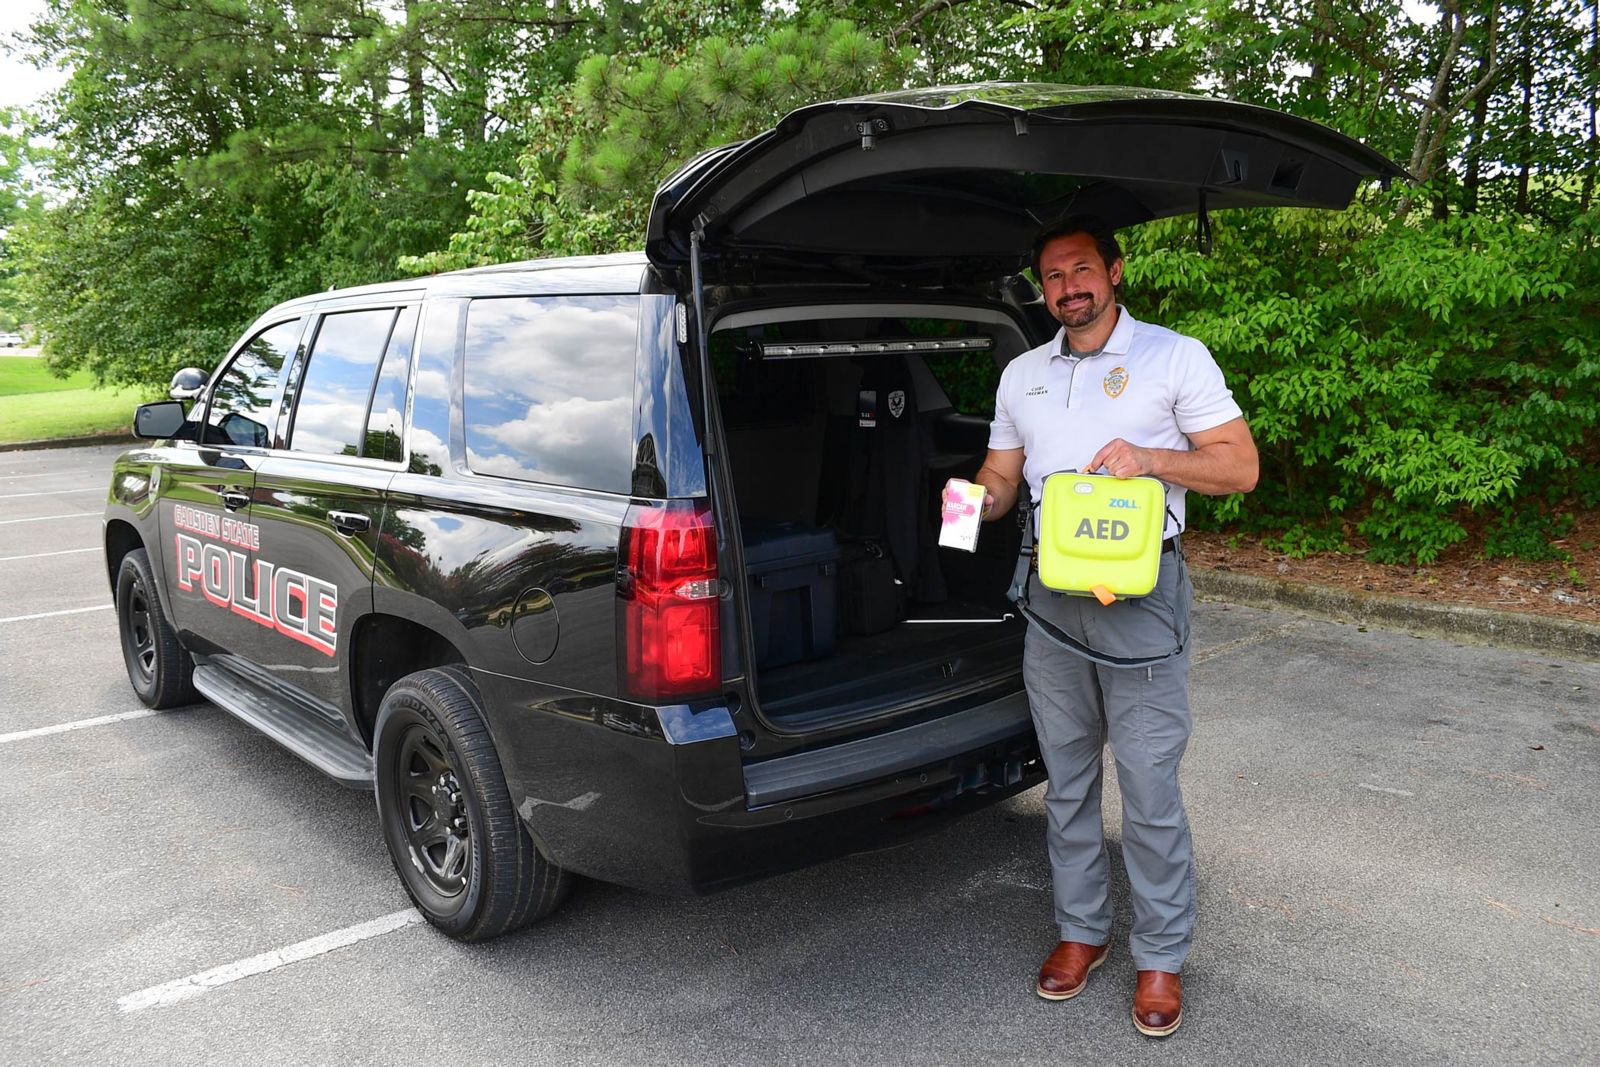 Chief Jay Freeman with one of the Police and Public Safety Department vehicles, which are now equipped with Automated External Defibrillators and Narcan, an opioid overdose reversal medication